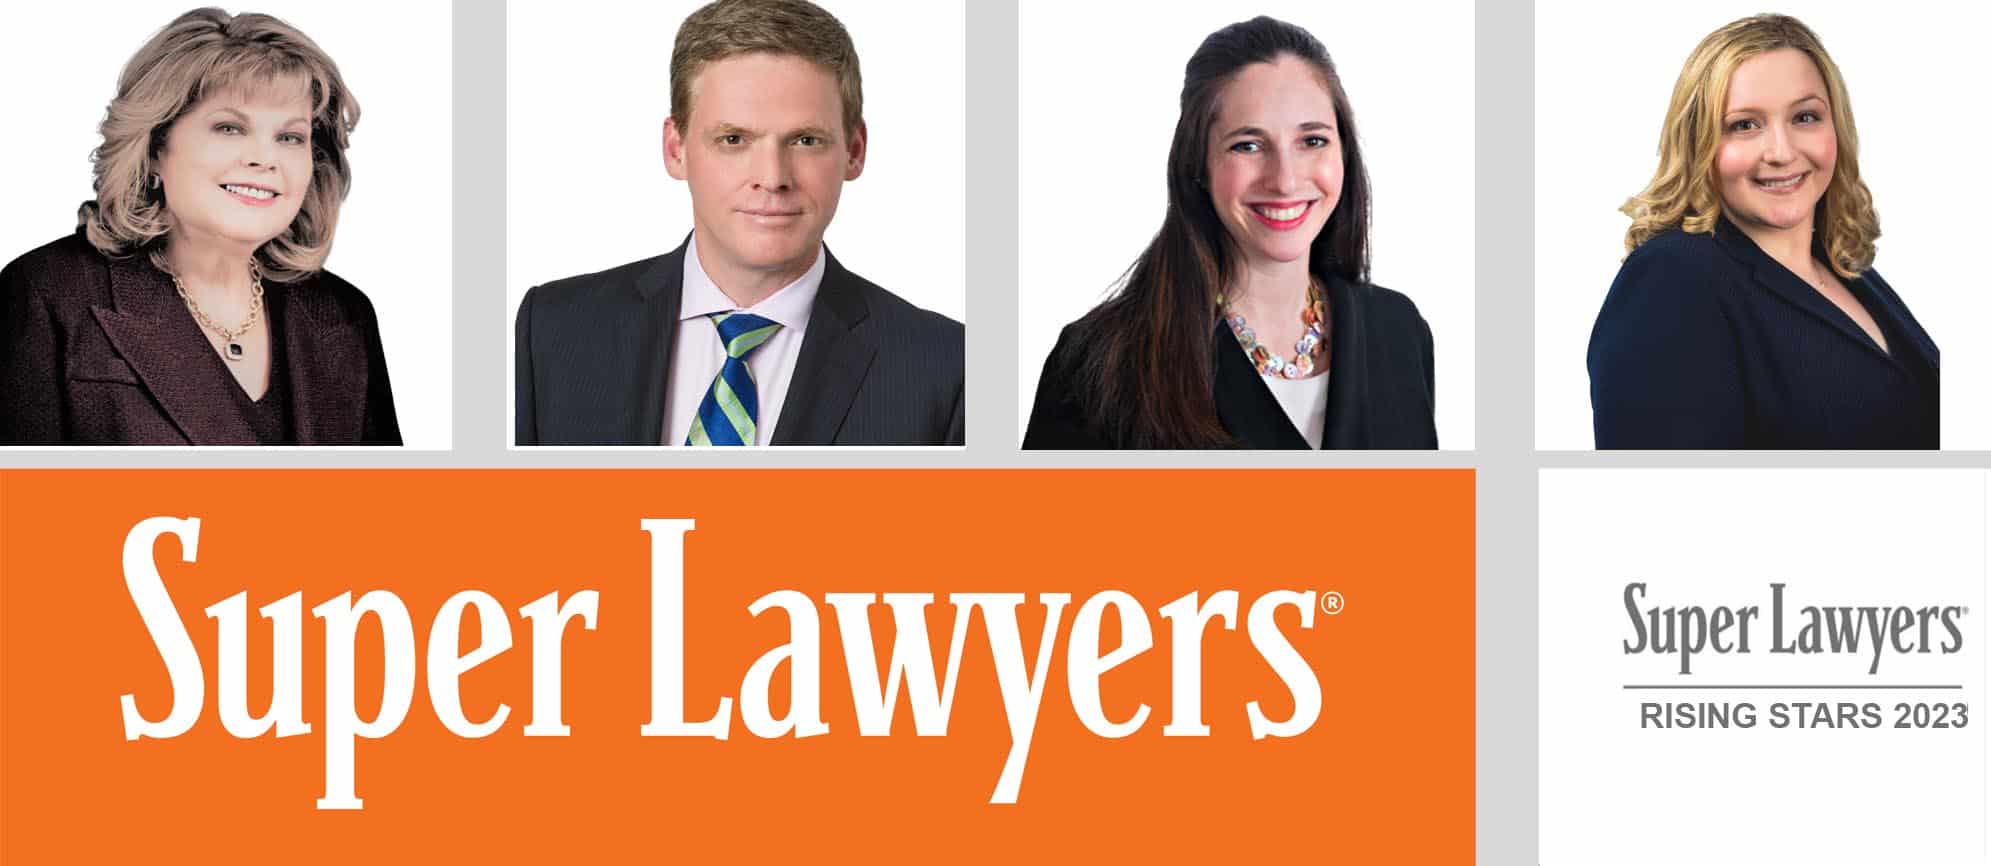 Super Lawyers Honors 4 Attorneys from Hoffenberg & Block